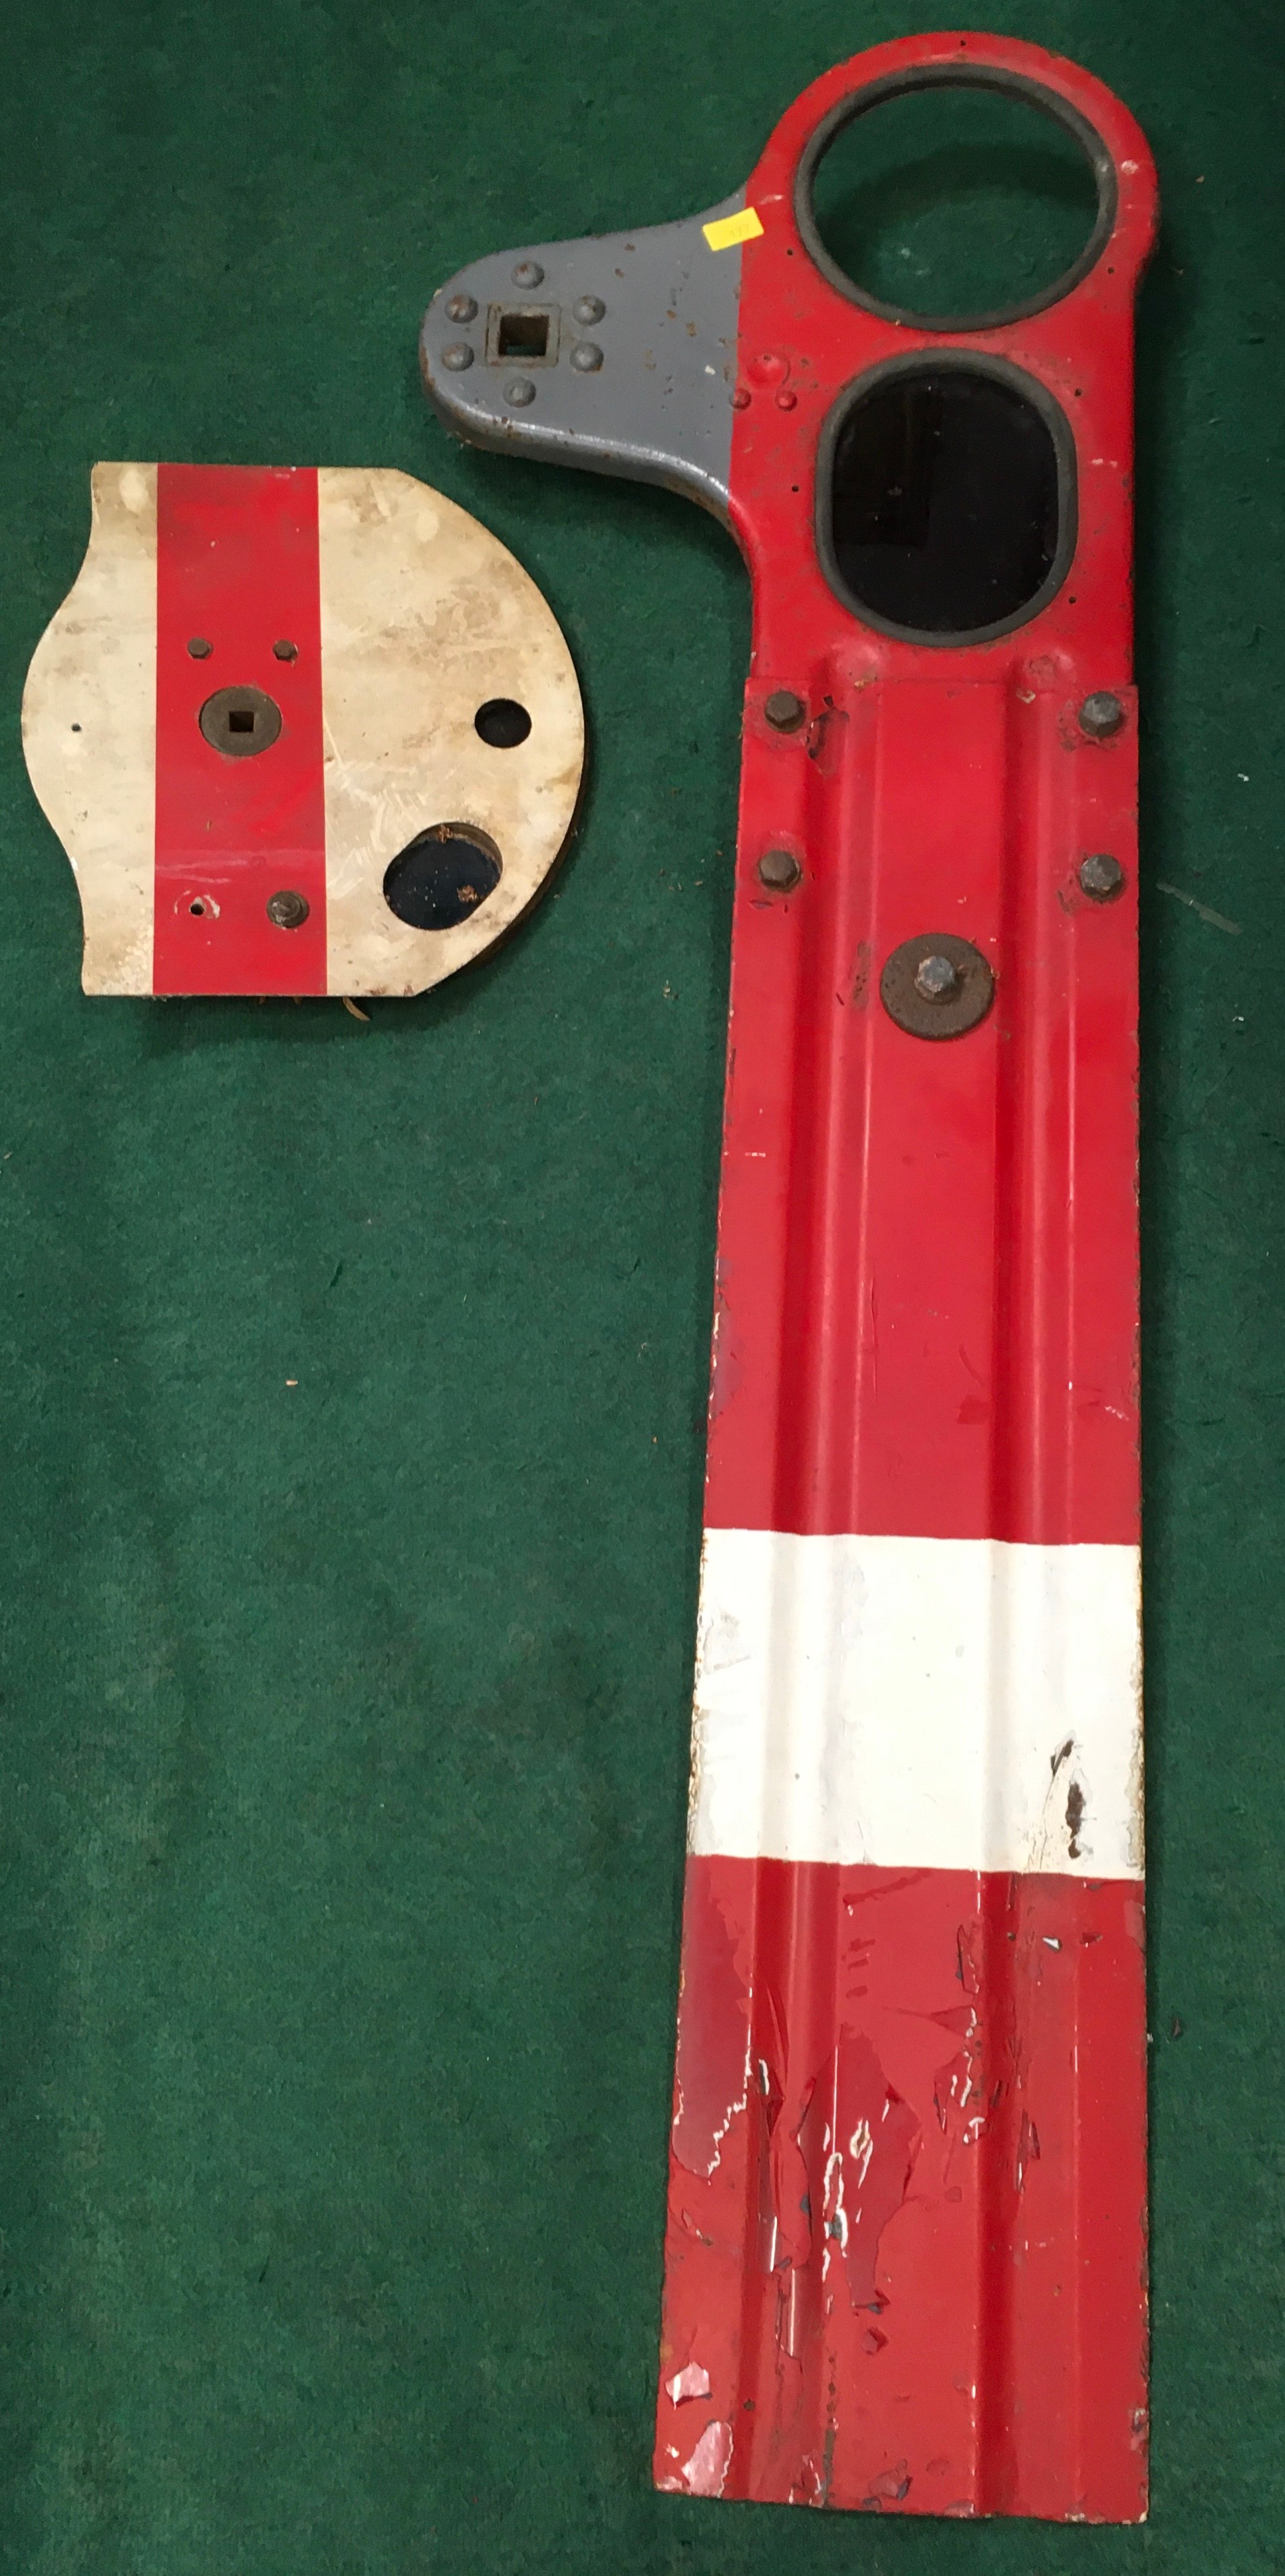 Railway shunting signal. 159x52cm (Main Section), 40x37cm (Smaller section). We believe it to be